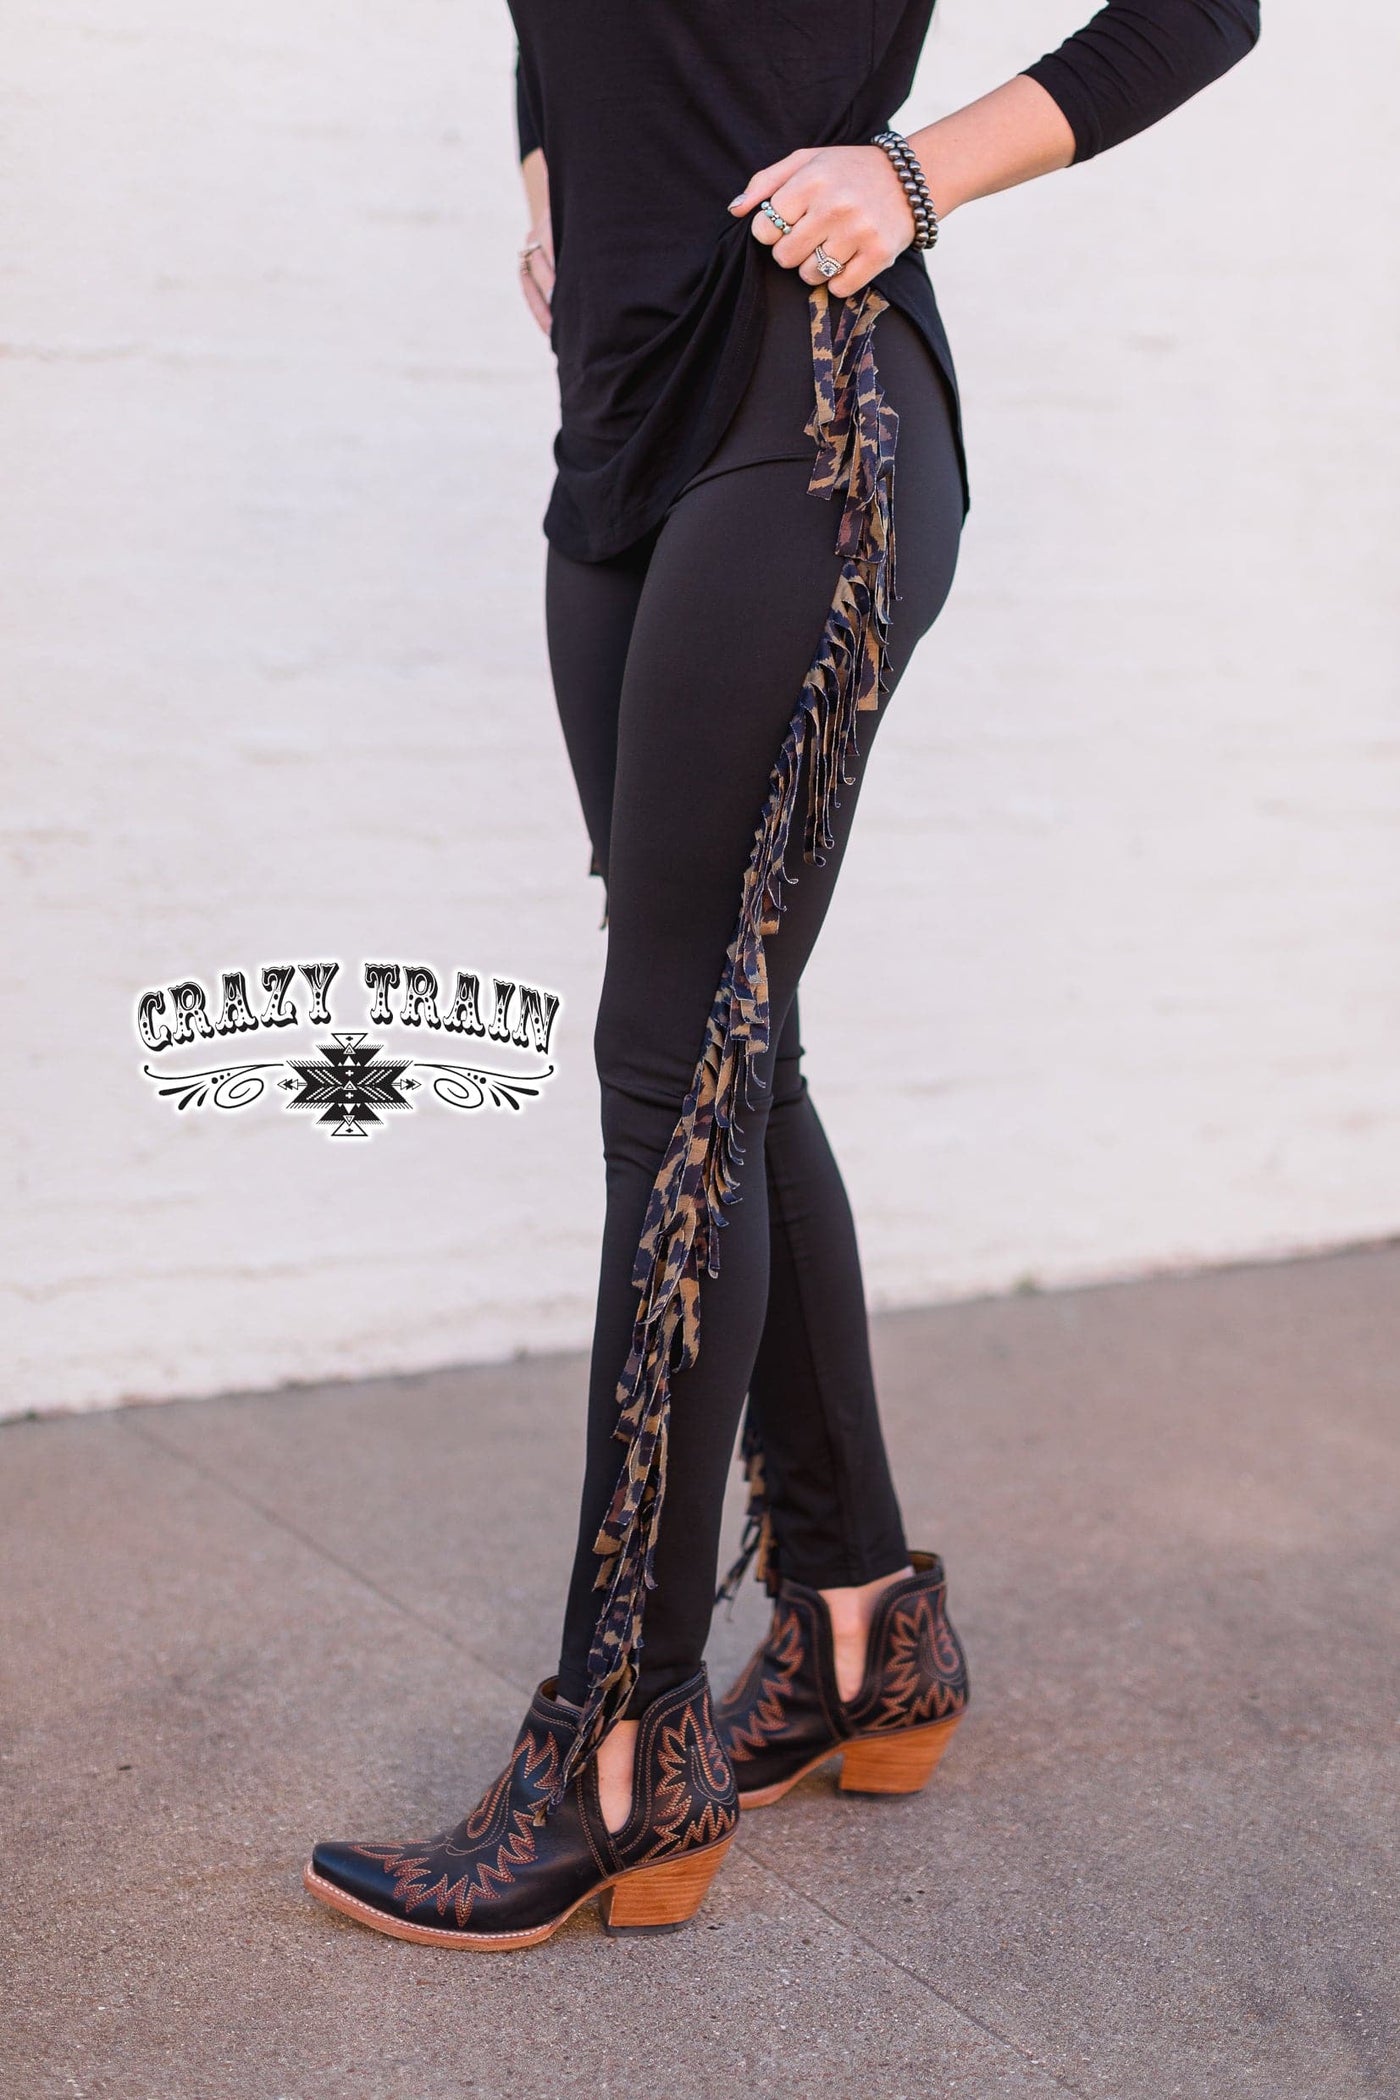 Leggings  Meow Town Leggings from Crazy Train Clothing